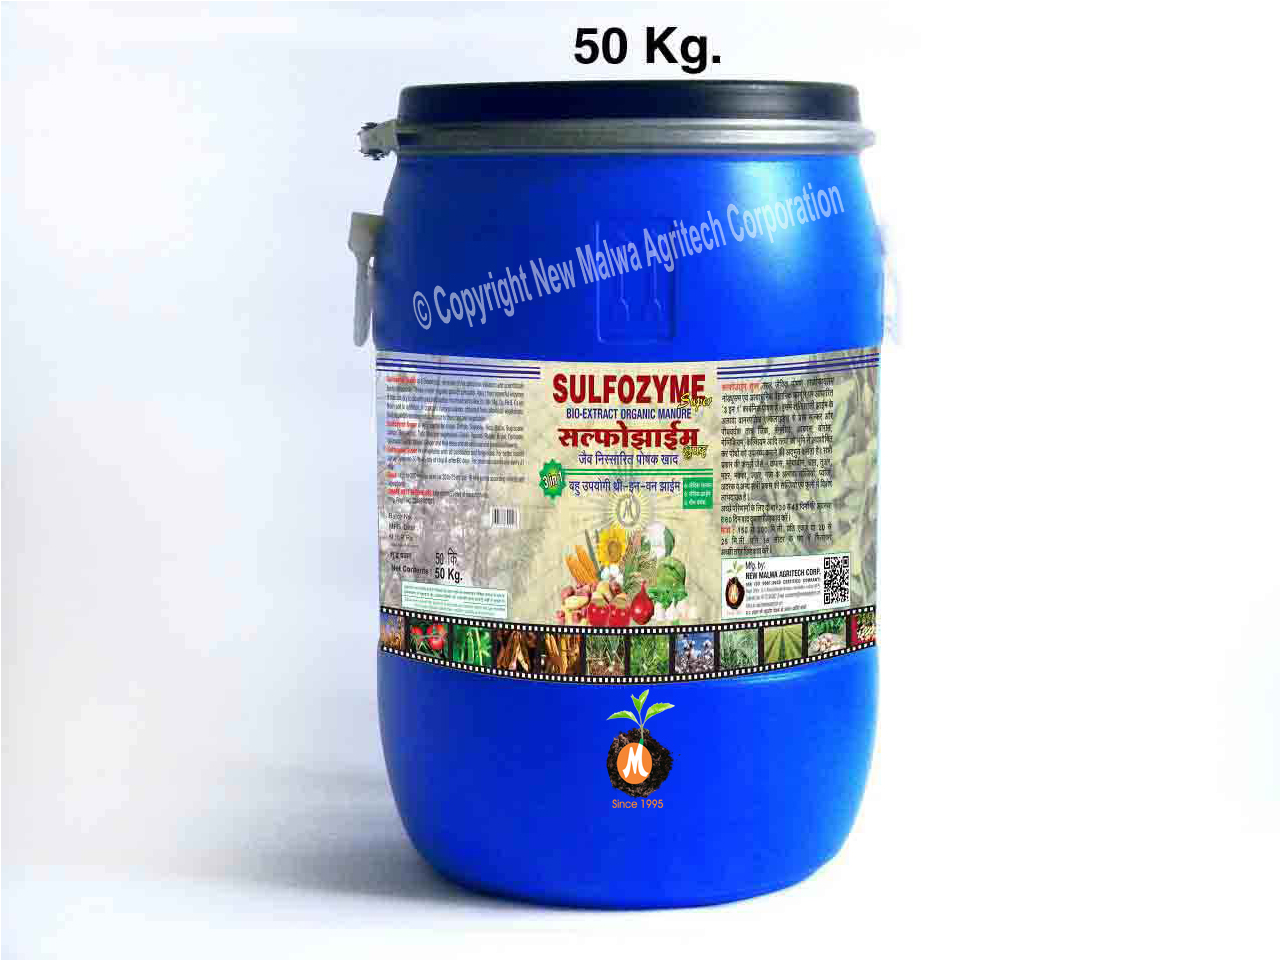 Zyme Granules in 50 kg. Drum for plants, crops and vegetables